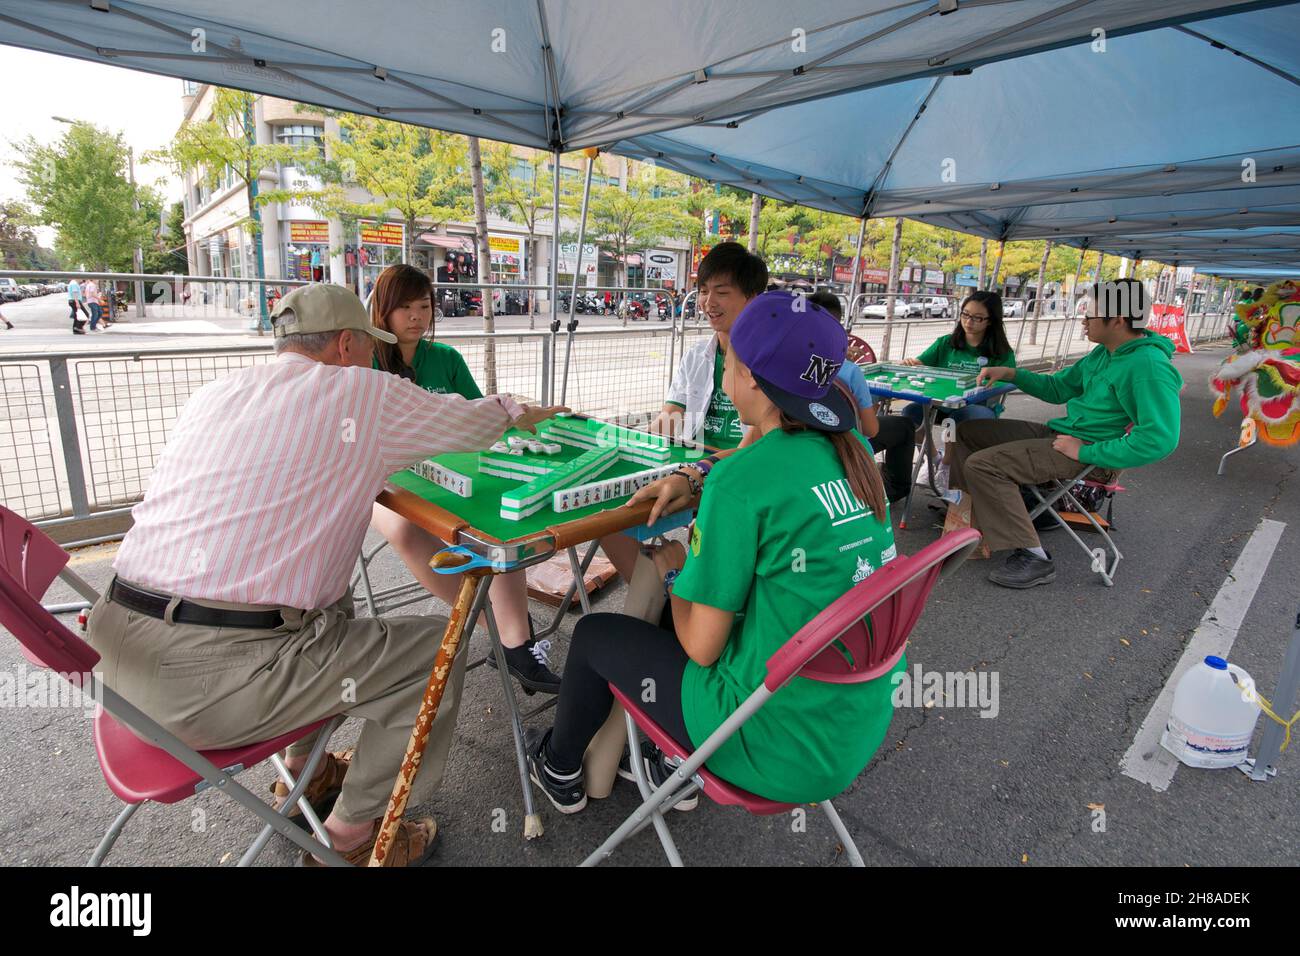 Toronto, Canada - Auguest,25, 2013: People playing Mahjong board game on a table in Chinatown, Toronto, Canada. Stock Photo